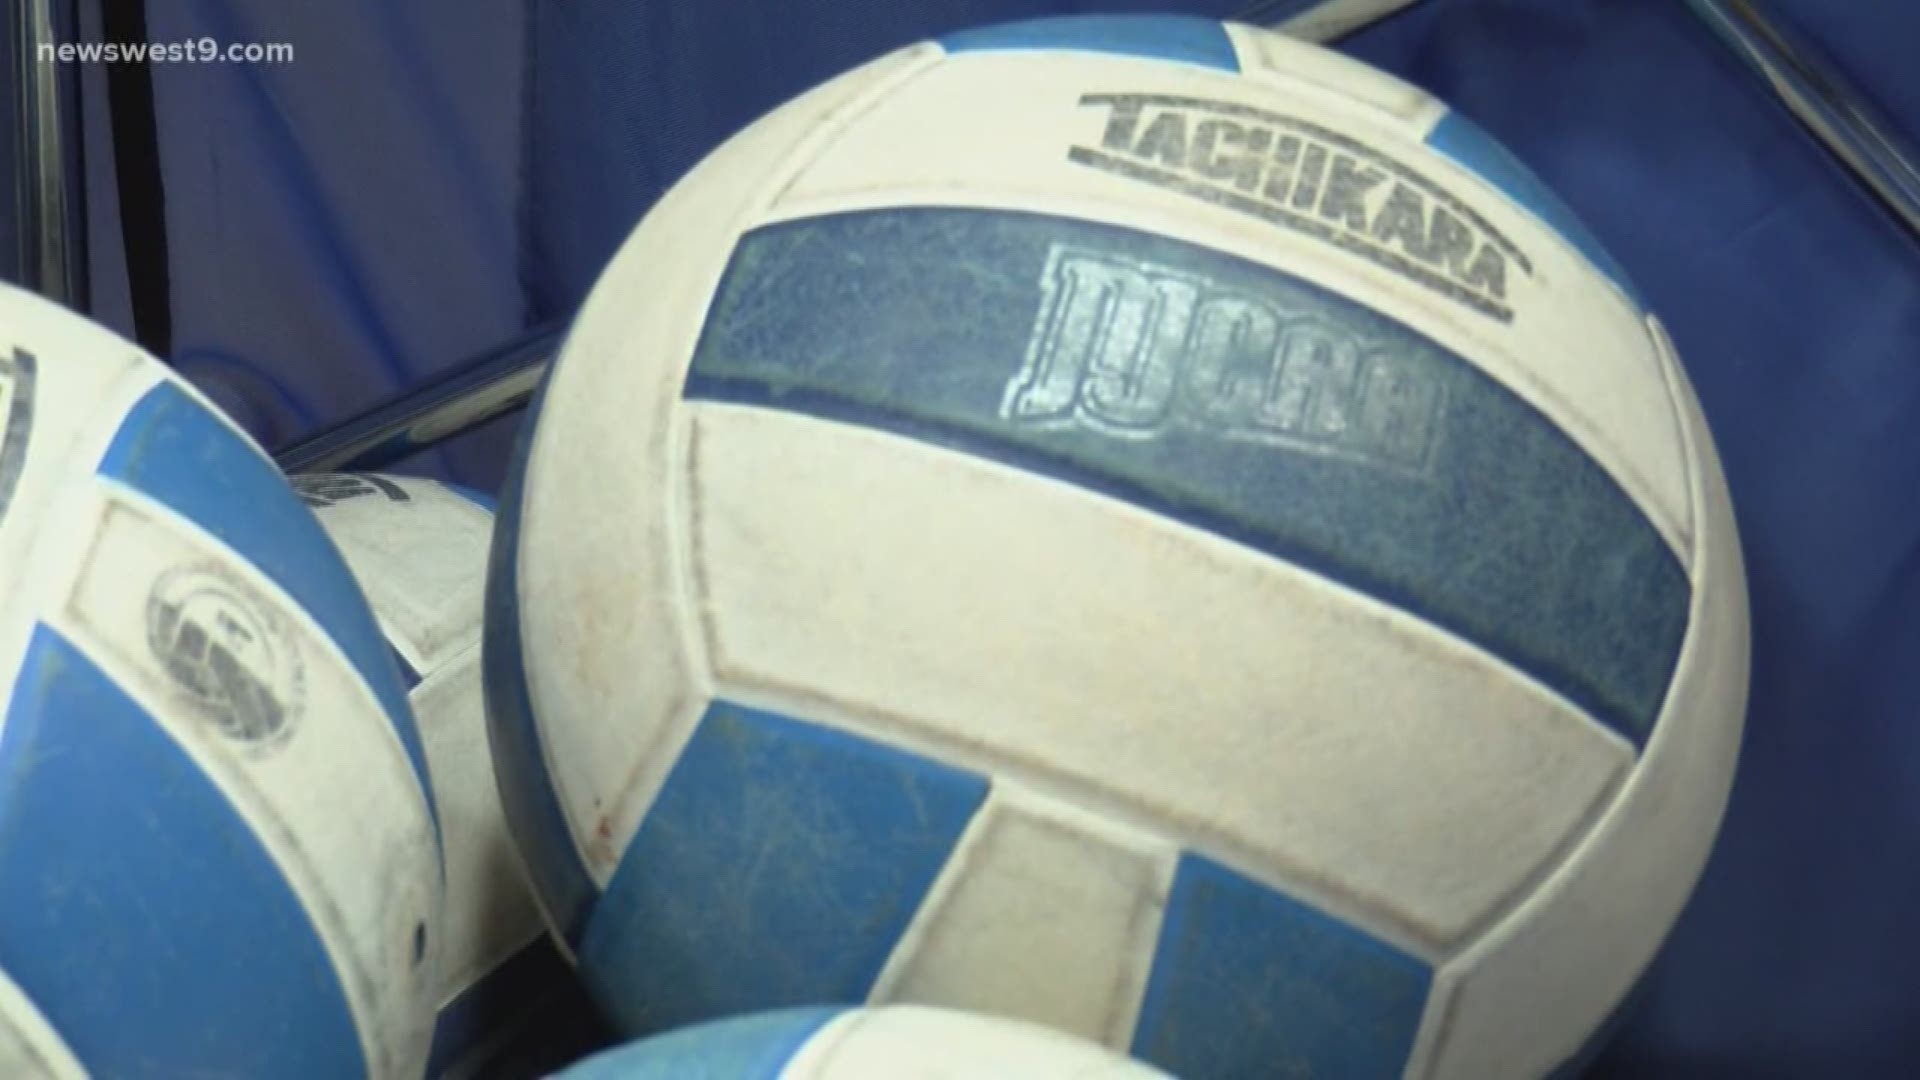 Midland and Odessa College Athletic Directors made their goals clear while a Wrangler volleyball player voiced some concerns about the return.